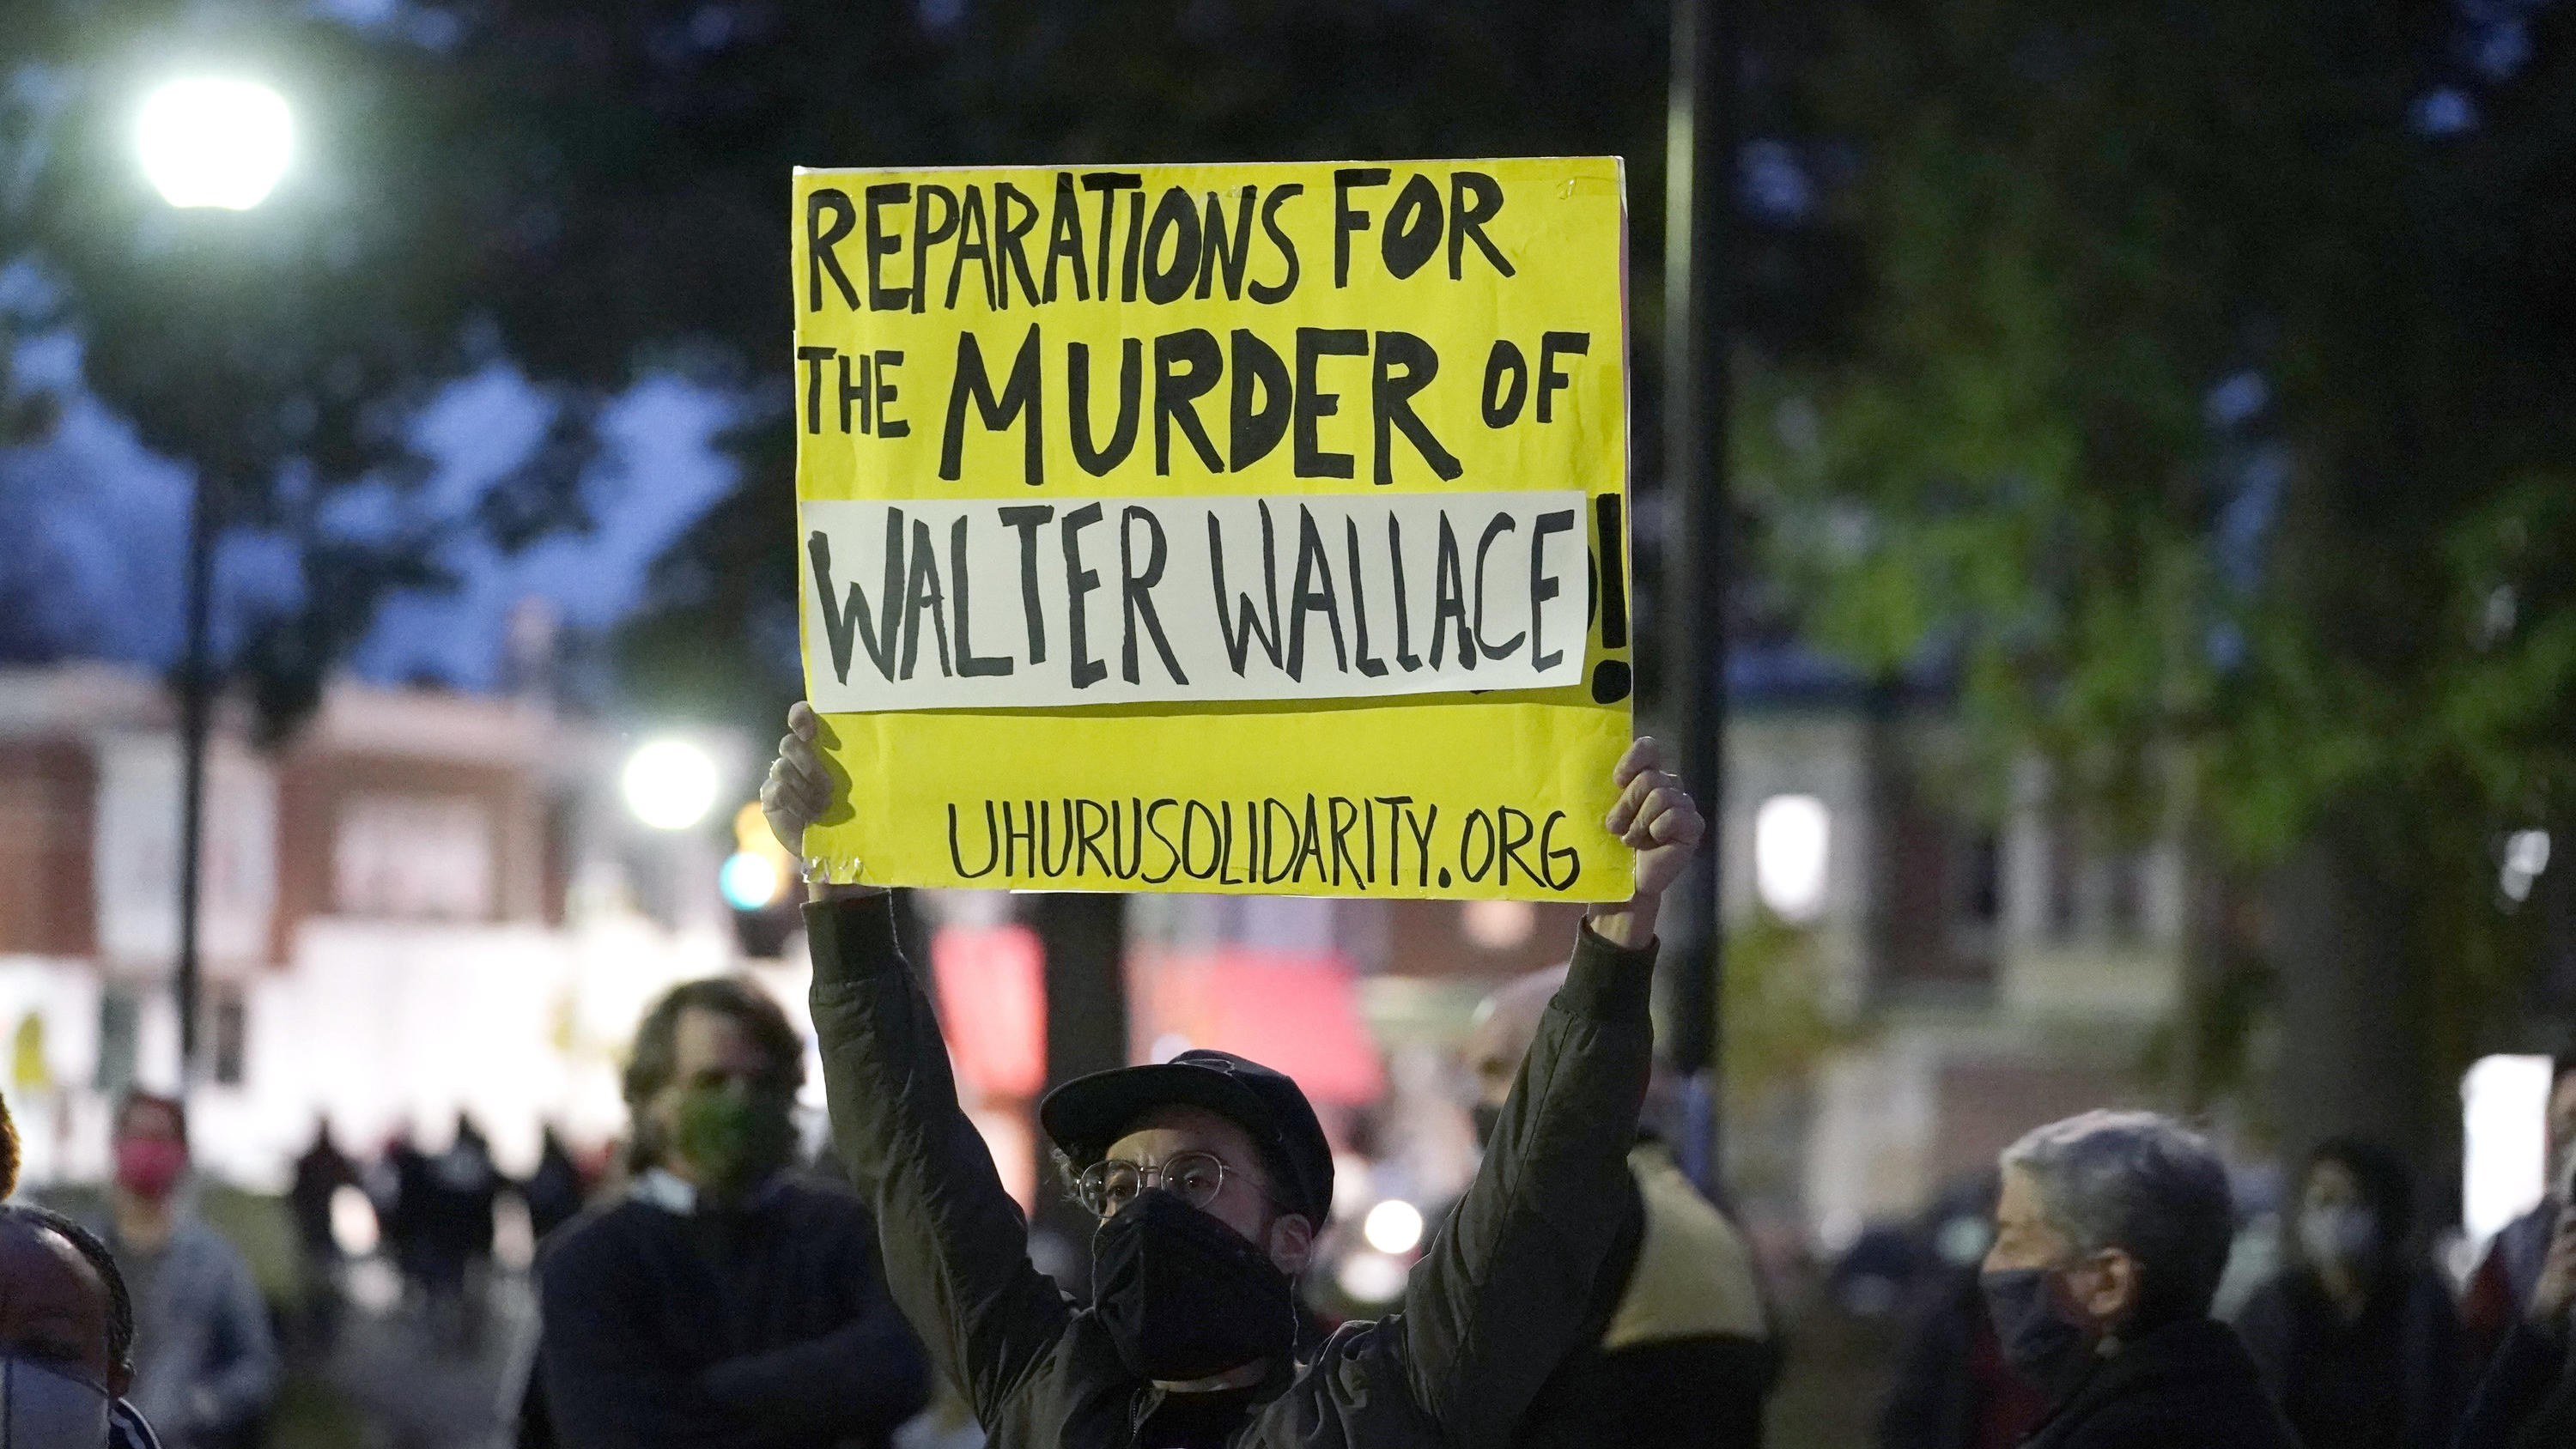 Protesters gather for a march Tuesday Oct. 27, 2020, in Philadelphia. Hundreds of demonstrators marched in West Philadelphia over the death of Walter Wallace, a Black man who was killed by police in Philadelphia on Monday. Police shot and killed the 